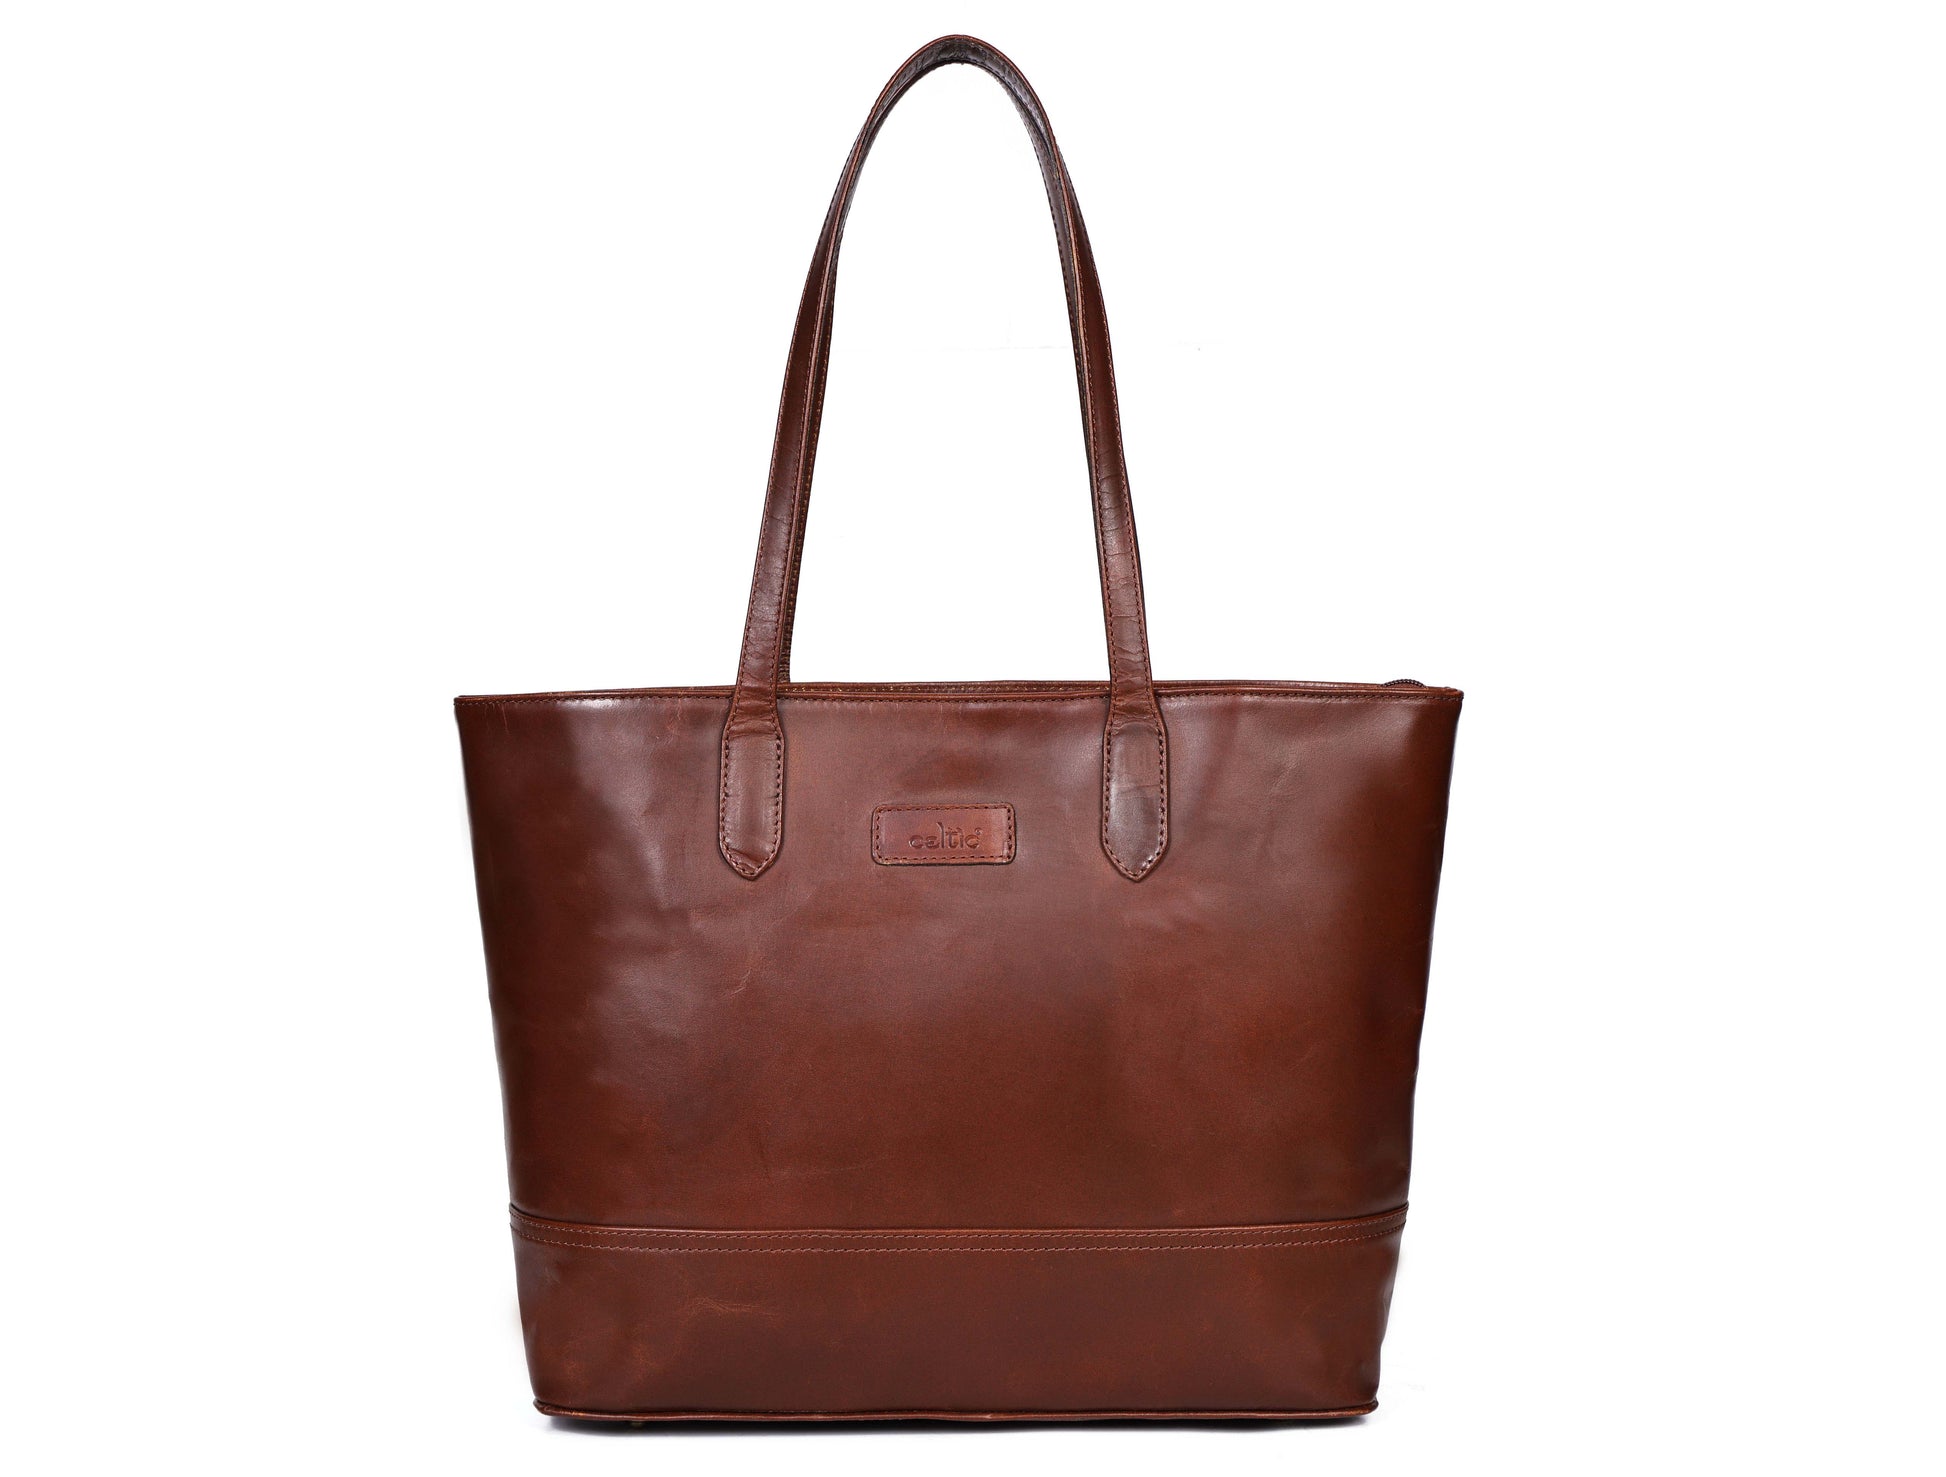 Luxurious Leather Tote Bags for Effortless Style and Everyday Sophistication. - CELTICINDIA